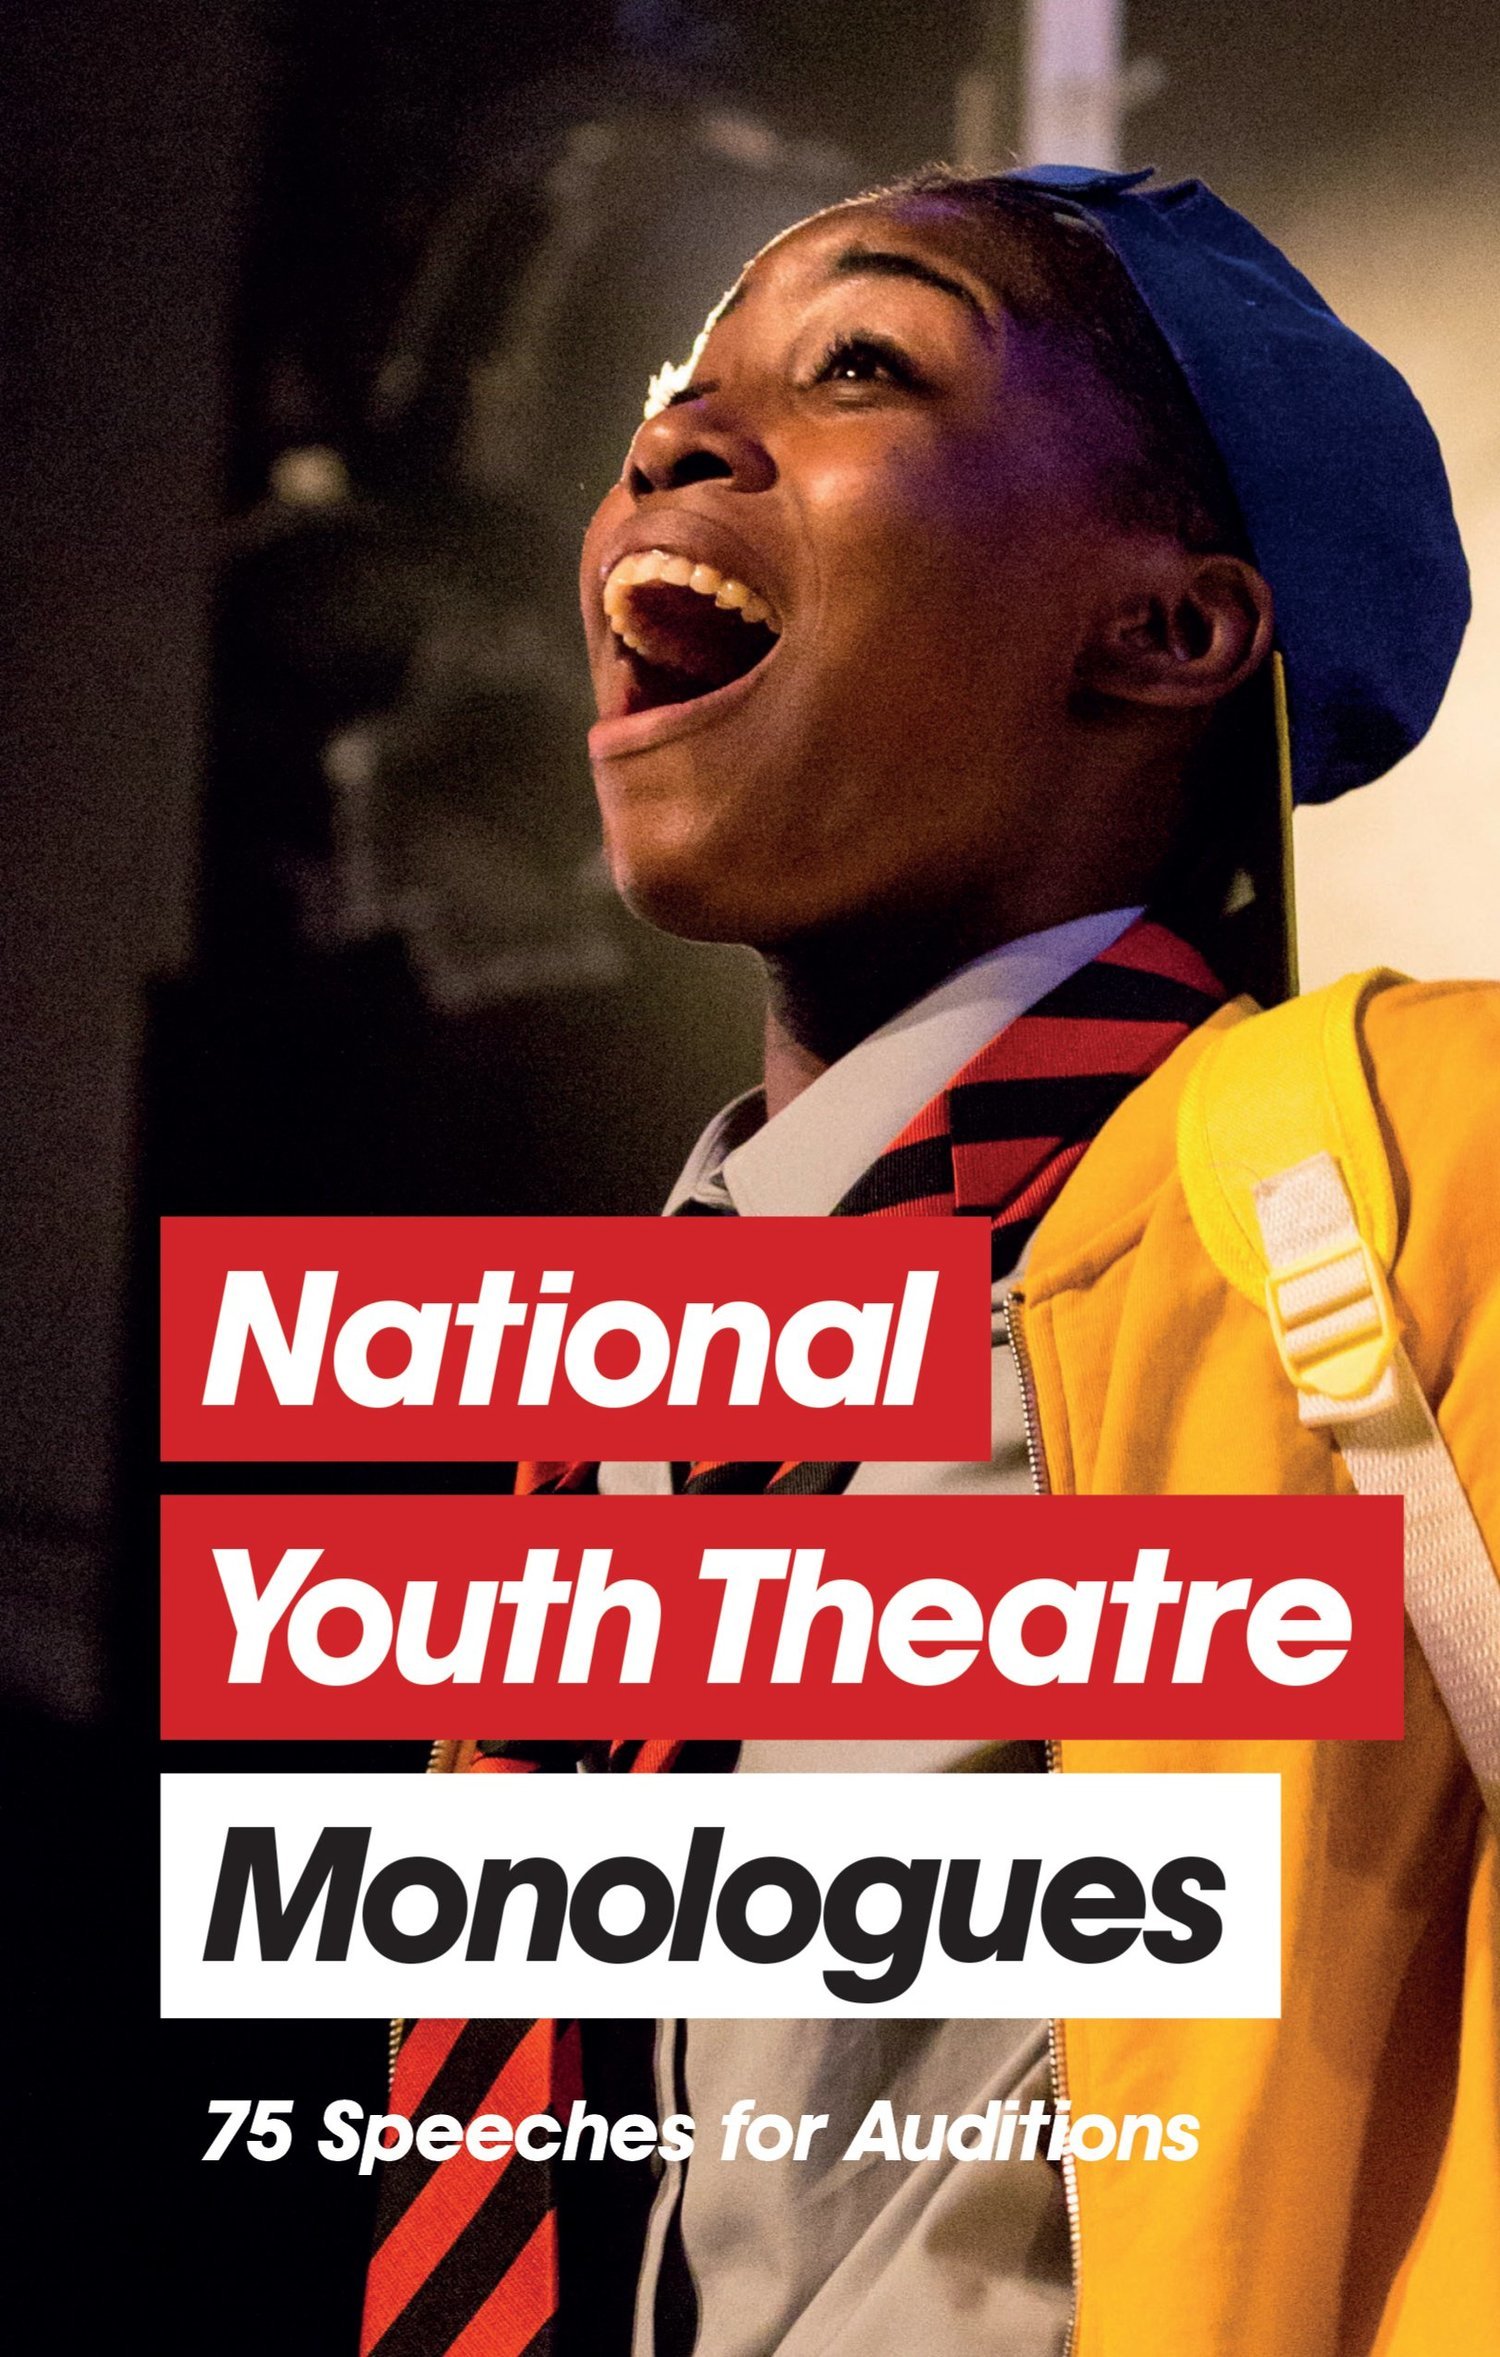 Book Review: NATIONAL YOUTH THEATRE MONOLOGUES, Michael Bryher 